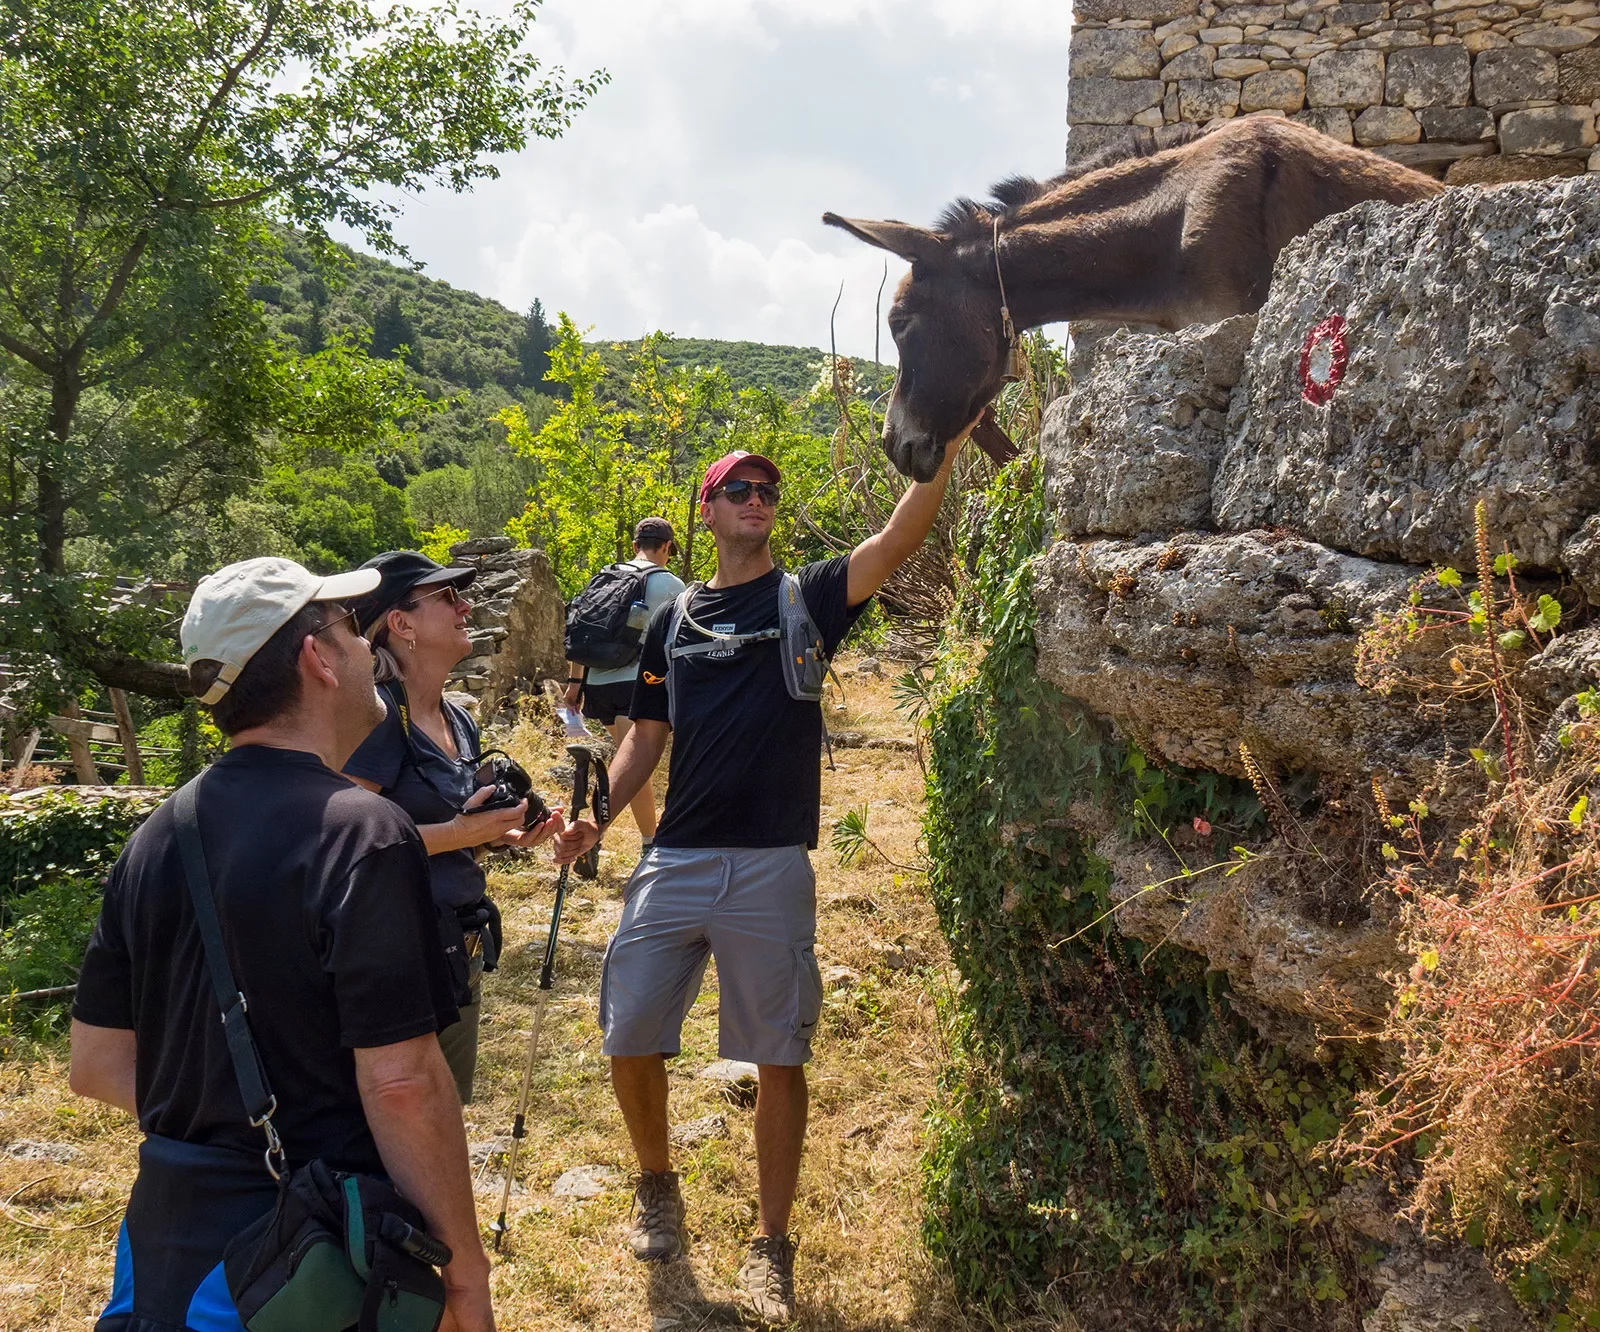 Four guests walking along stone structure, donkey putting head nearby, guest petting it.